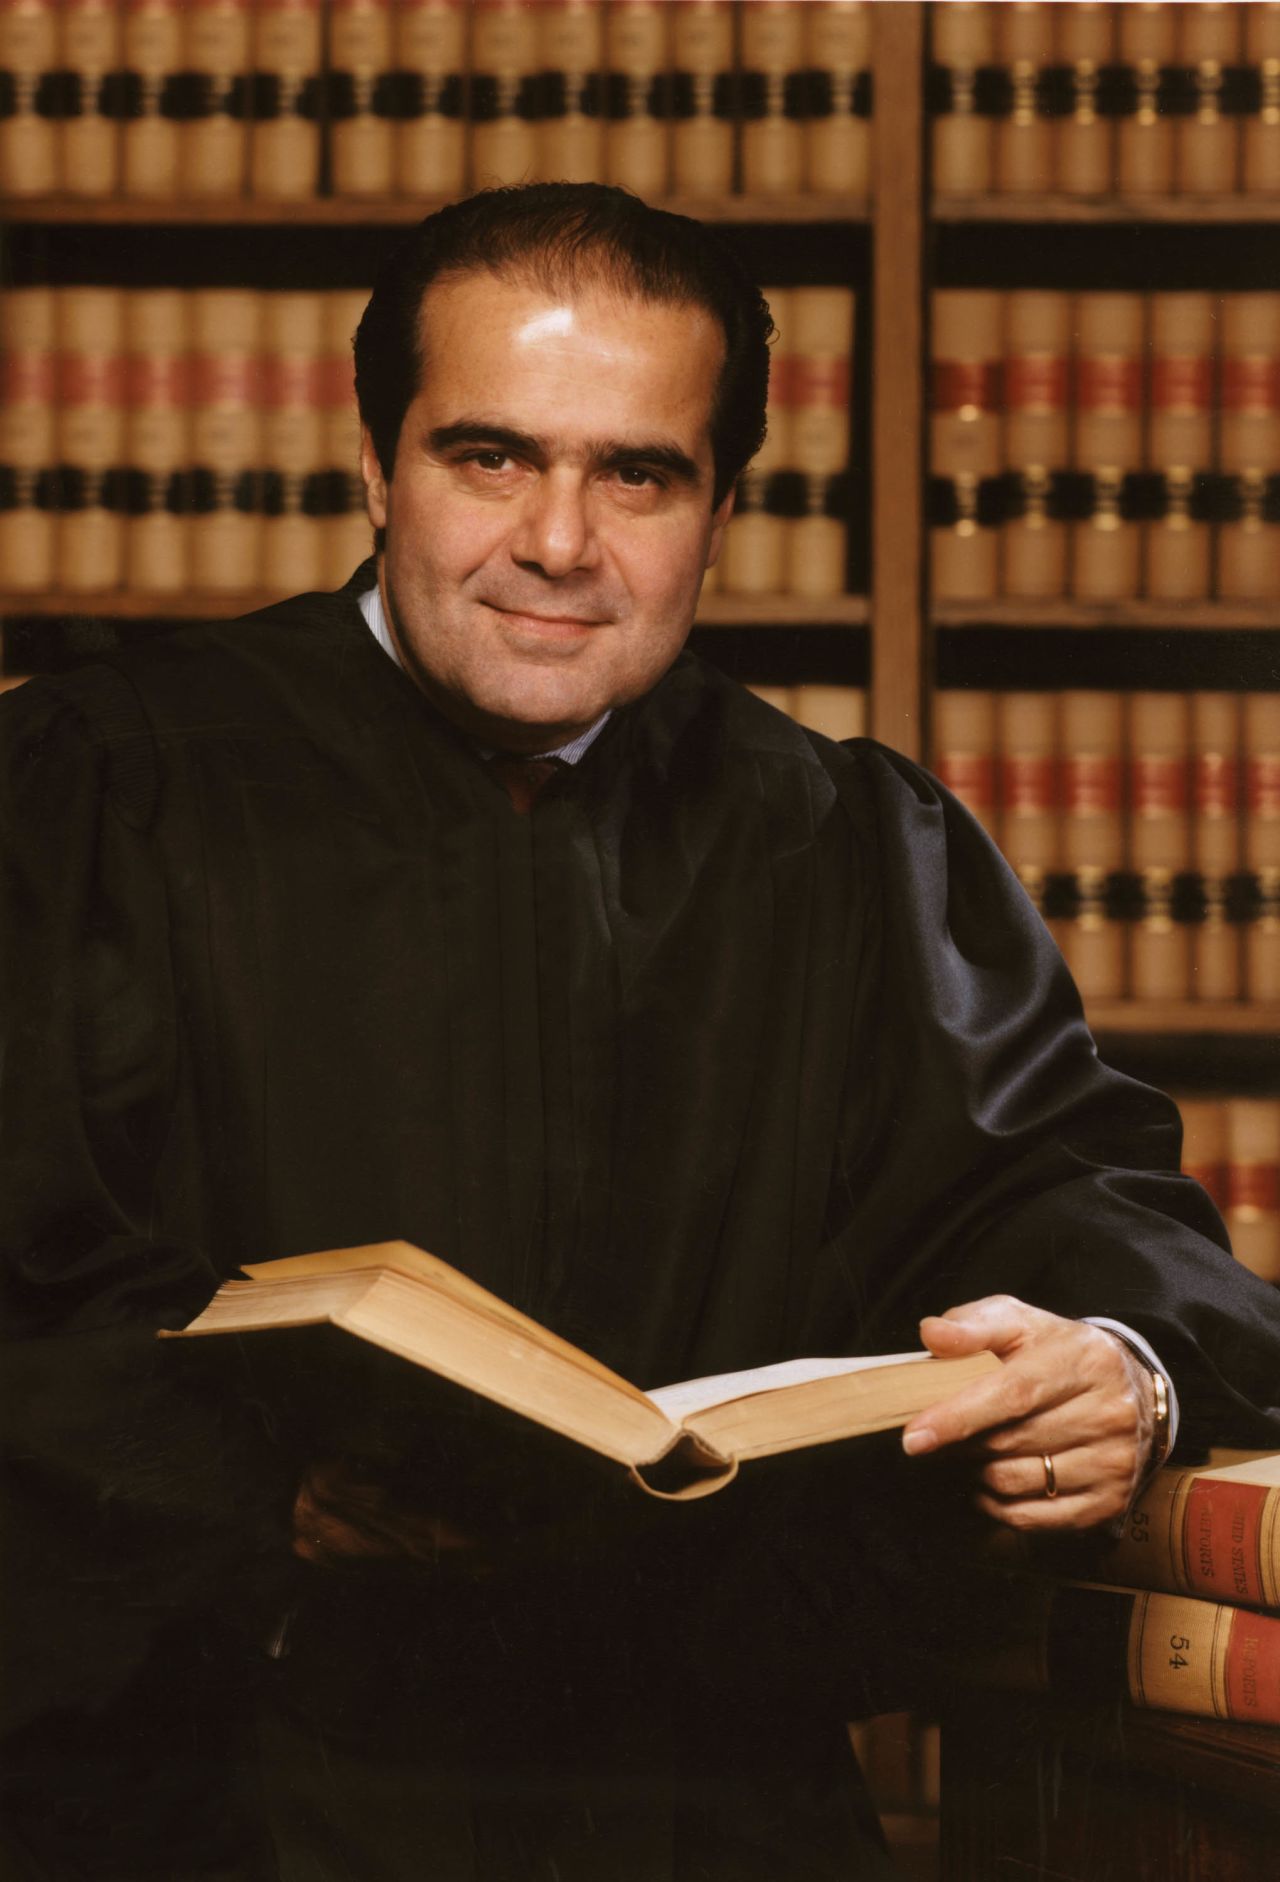 U.S. Supreme Court Justice <a href="http://www.cnn.com/2016/02/13/politics/supreme-court-justice-antonin-scalia-dies-at-79/" target="_blank">Antonin Scalia</a>, the leading conservative voice on the high court, died at the age of 79, a government source and a family friend told CNN on February 13.